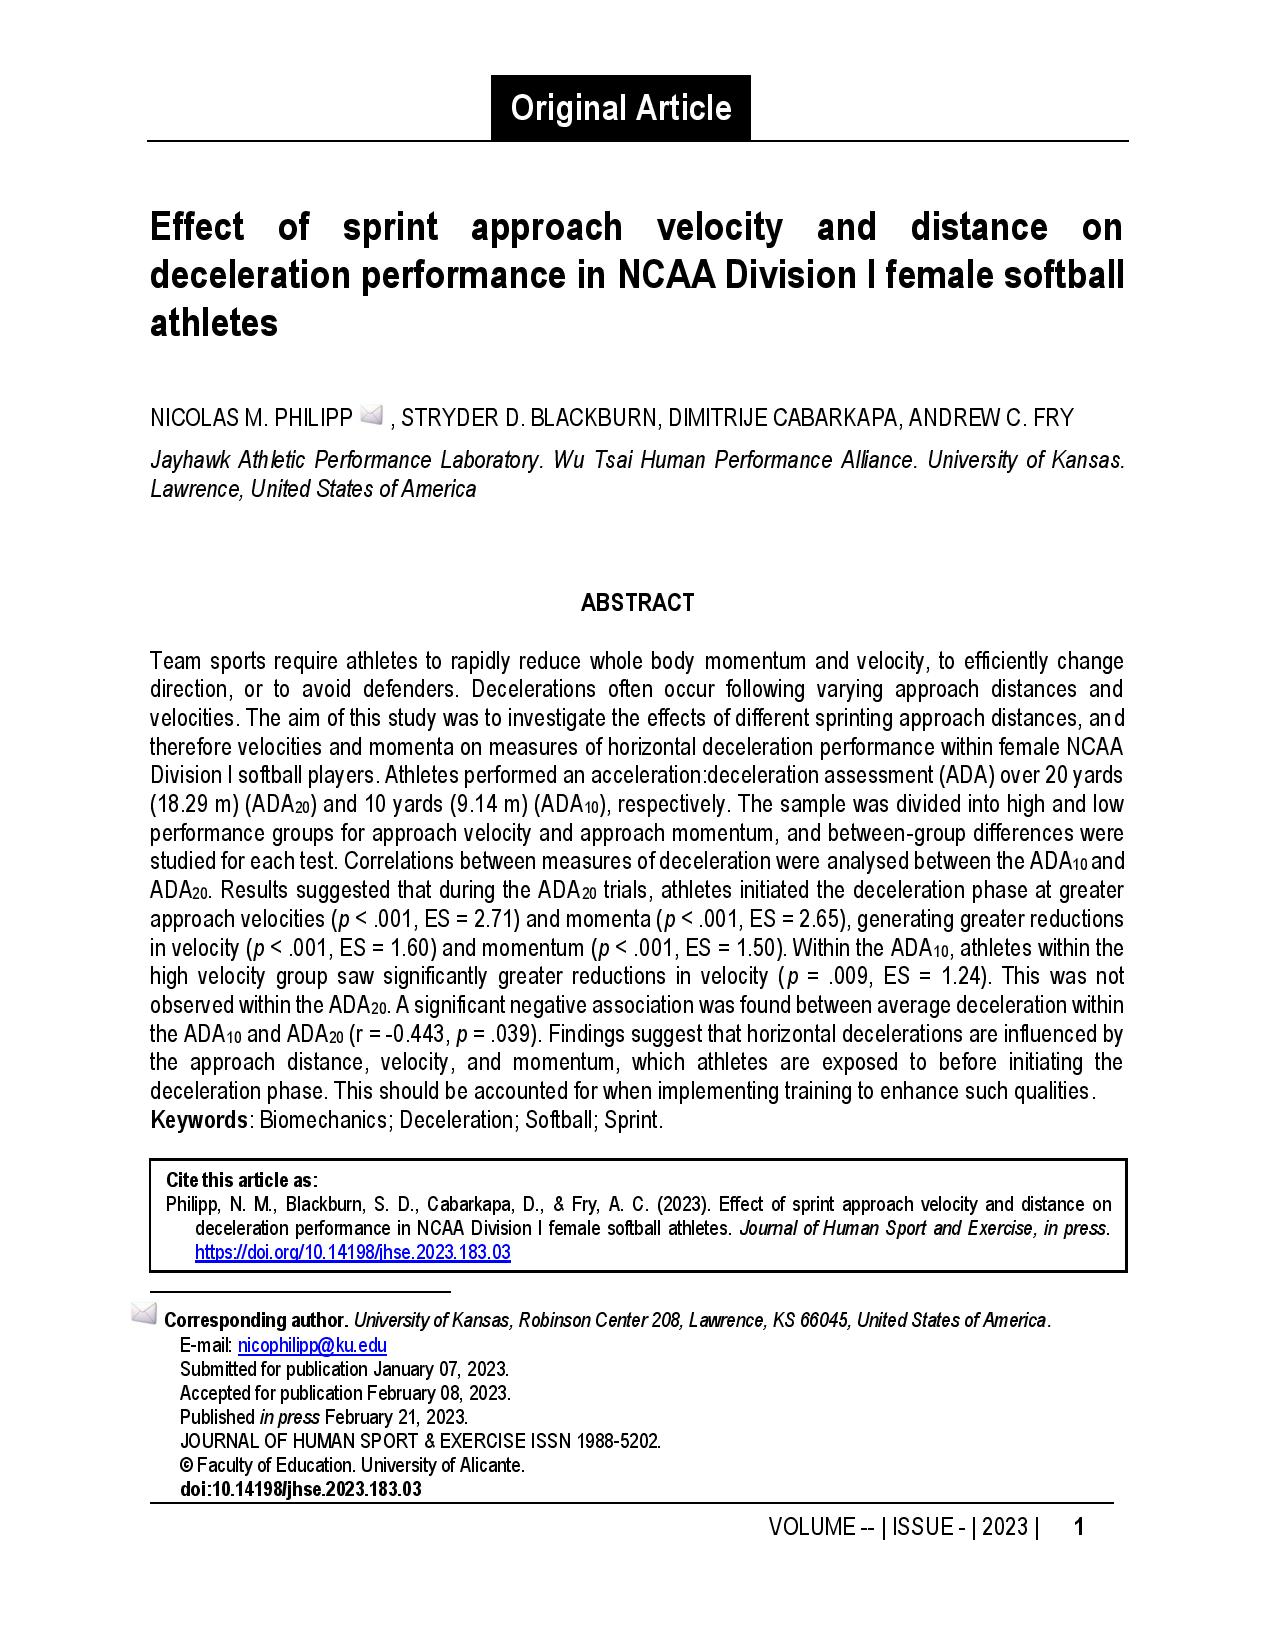 Effect of sprint approach velocity and distance on deceleration performance in NCAA Division I female softball athletes